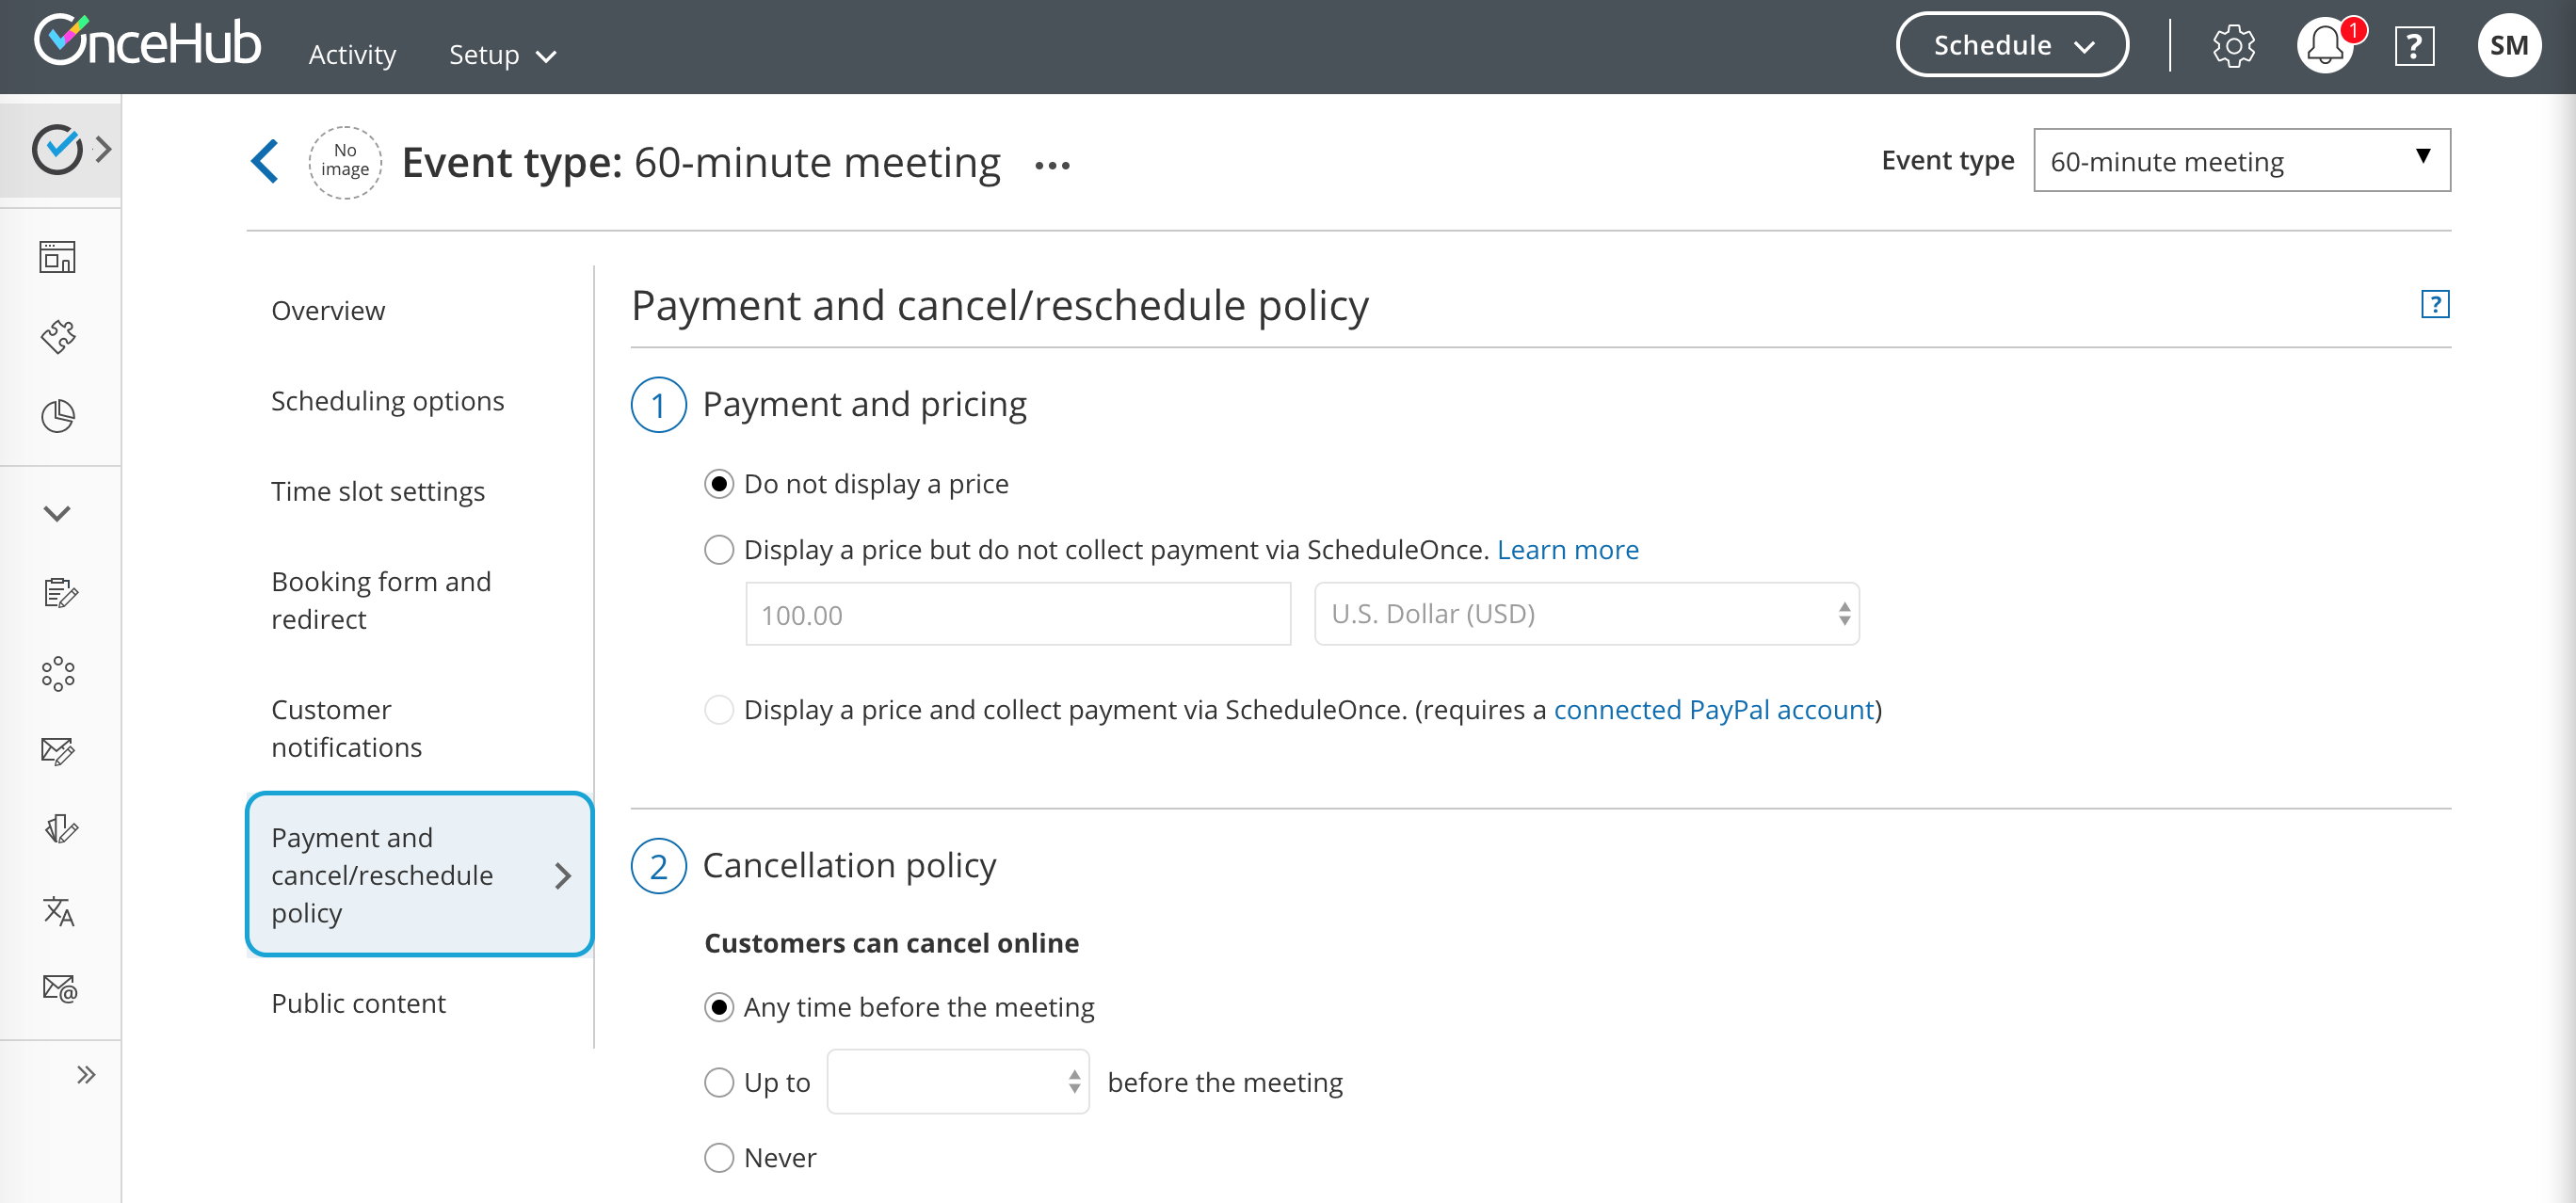 Figure 1: Payment and cancel/reschedule policy